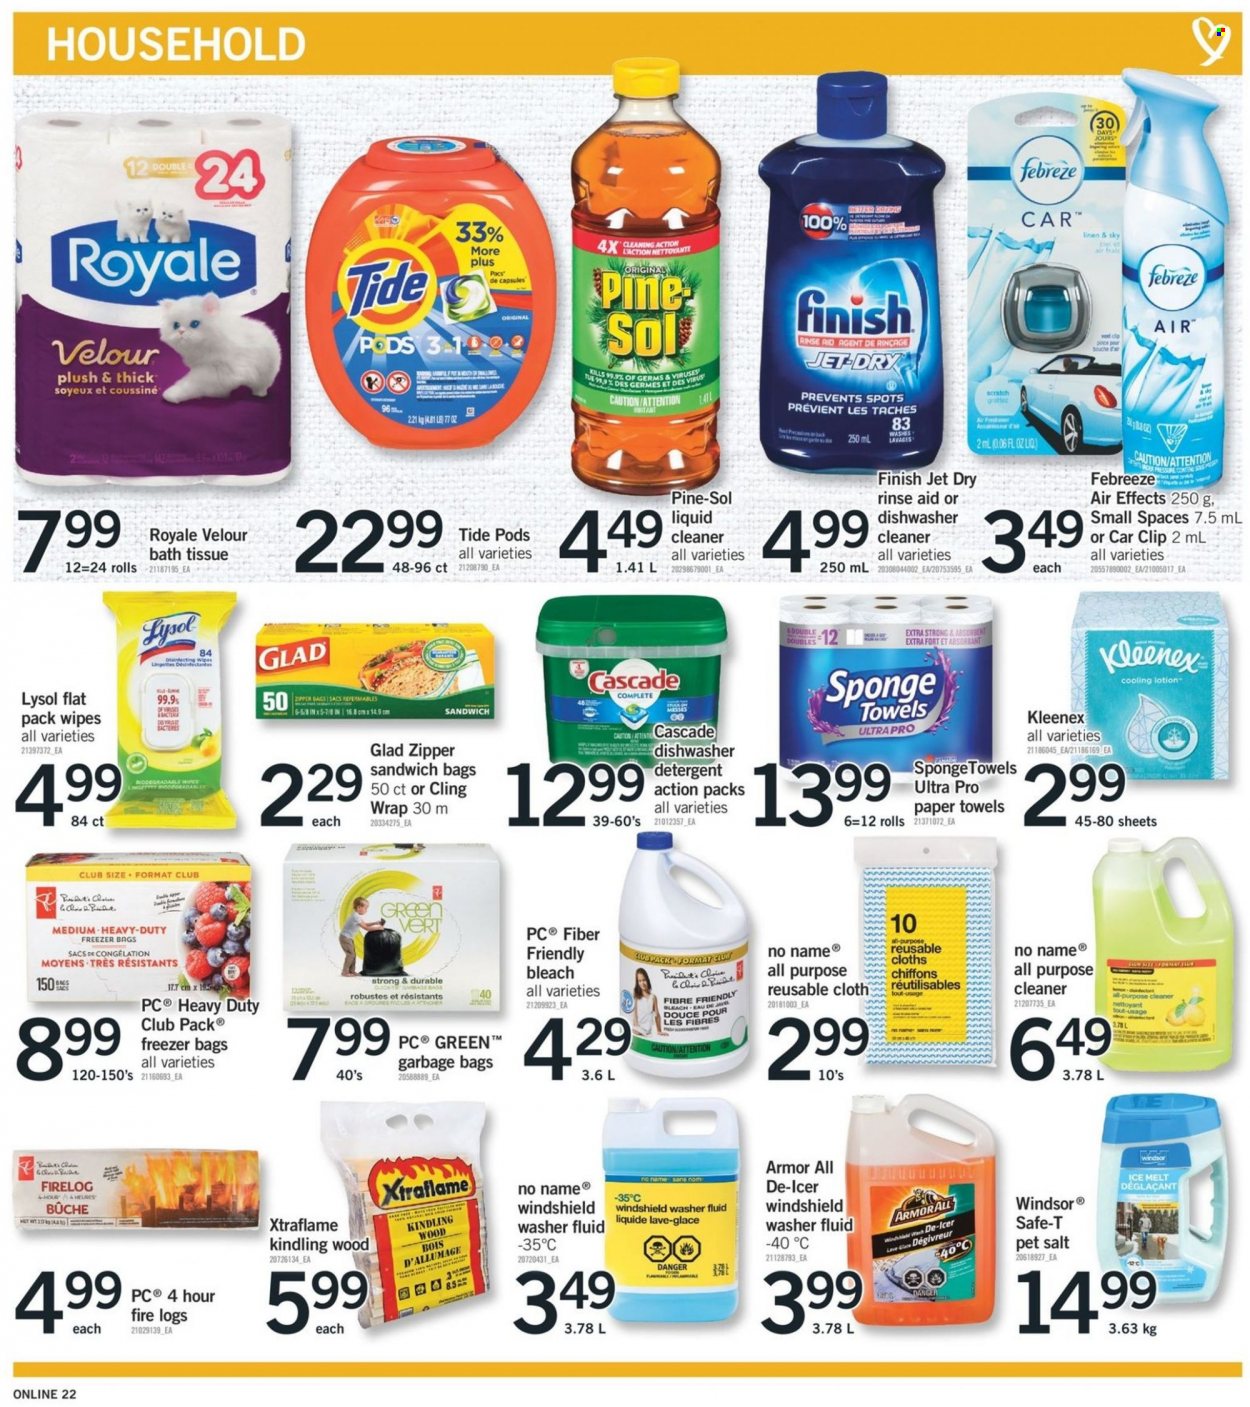 thumbnail - Fortinos Flyer - January 13, 2022 - January 19, 2022 - Sales products - No Name, salt, wipes, bath tissue, Kleenex, kitchen towels, paper towels, Febreze, cleaner, bleach, liquid cleaner, all purpose cleaner, Lysol, Pine-Sol, Tide, Cascade, dishwashing liquid, dishwasher cleaner, Jet, body lotion, bag, sponge, freezer bag, linens, freezer, washing machine, vest, fire logs, Armor All, ice melter, washer fluid, detergent. Page 23.